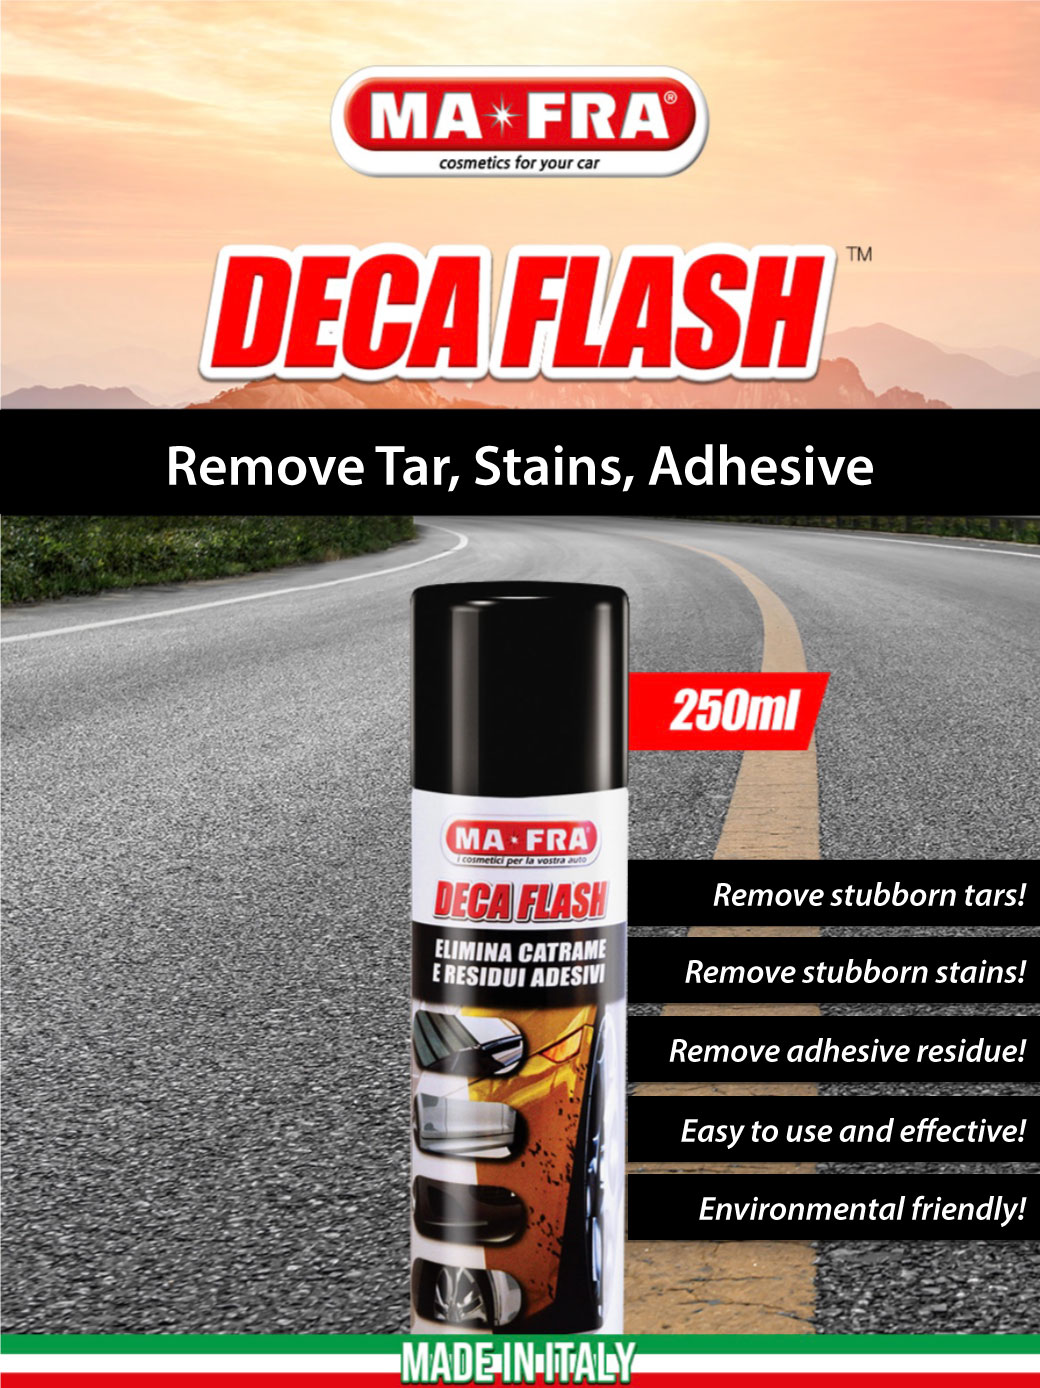 Mafra Deca Flash 250ml (Removes New and Old Sticker Adhesives Road Tar Stains and Stubborn Stains New Car Parrafin Wax) - Mafra Official Store Singapore